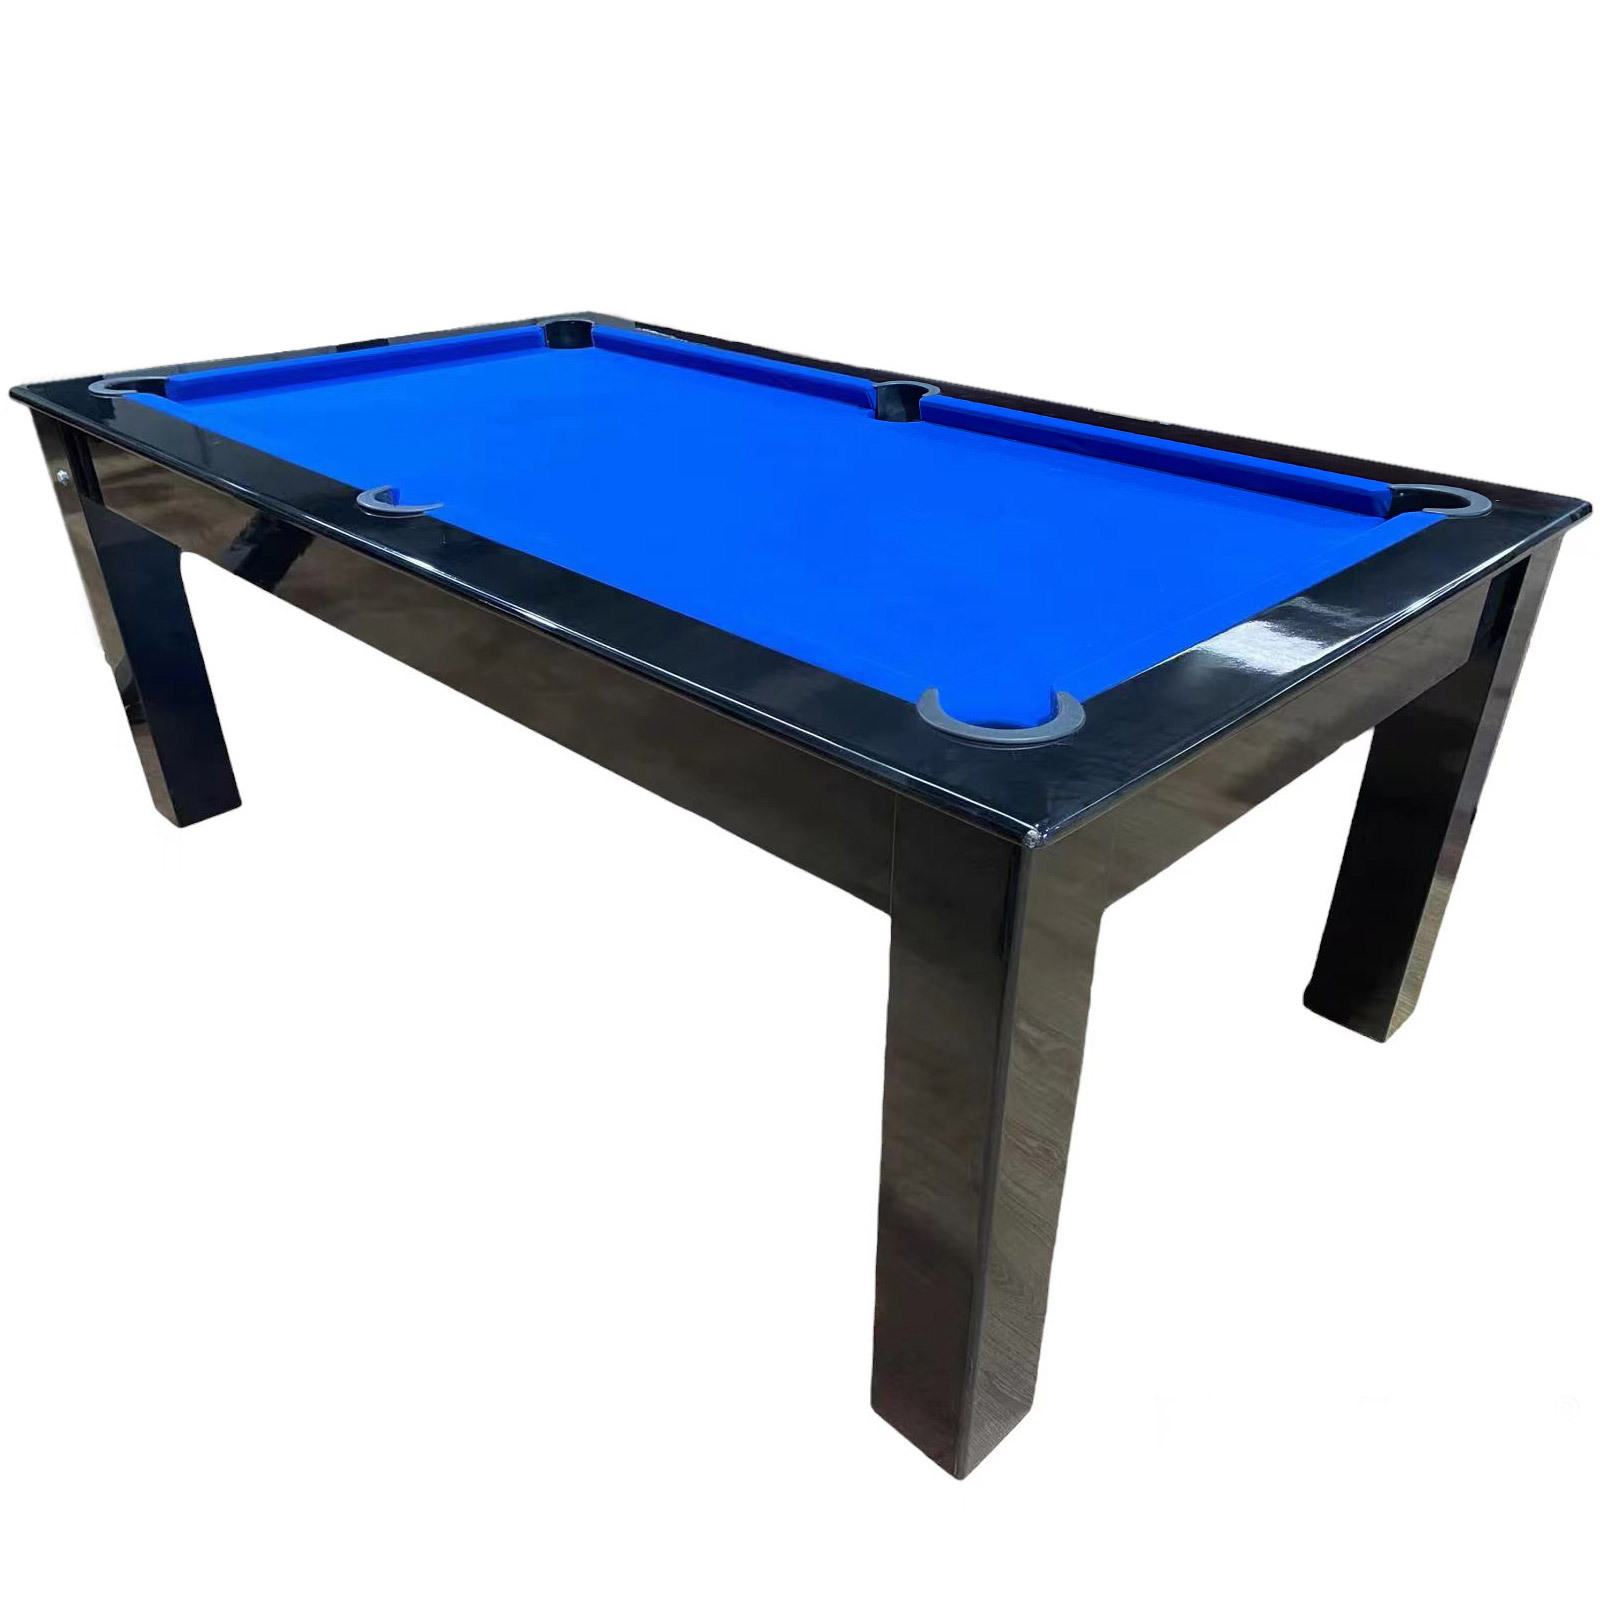 Melbourne special - 2nd hand 6.5ft MDF pool table